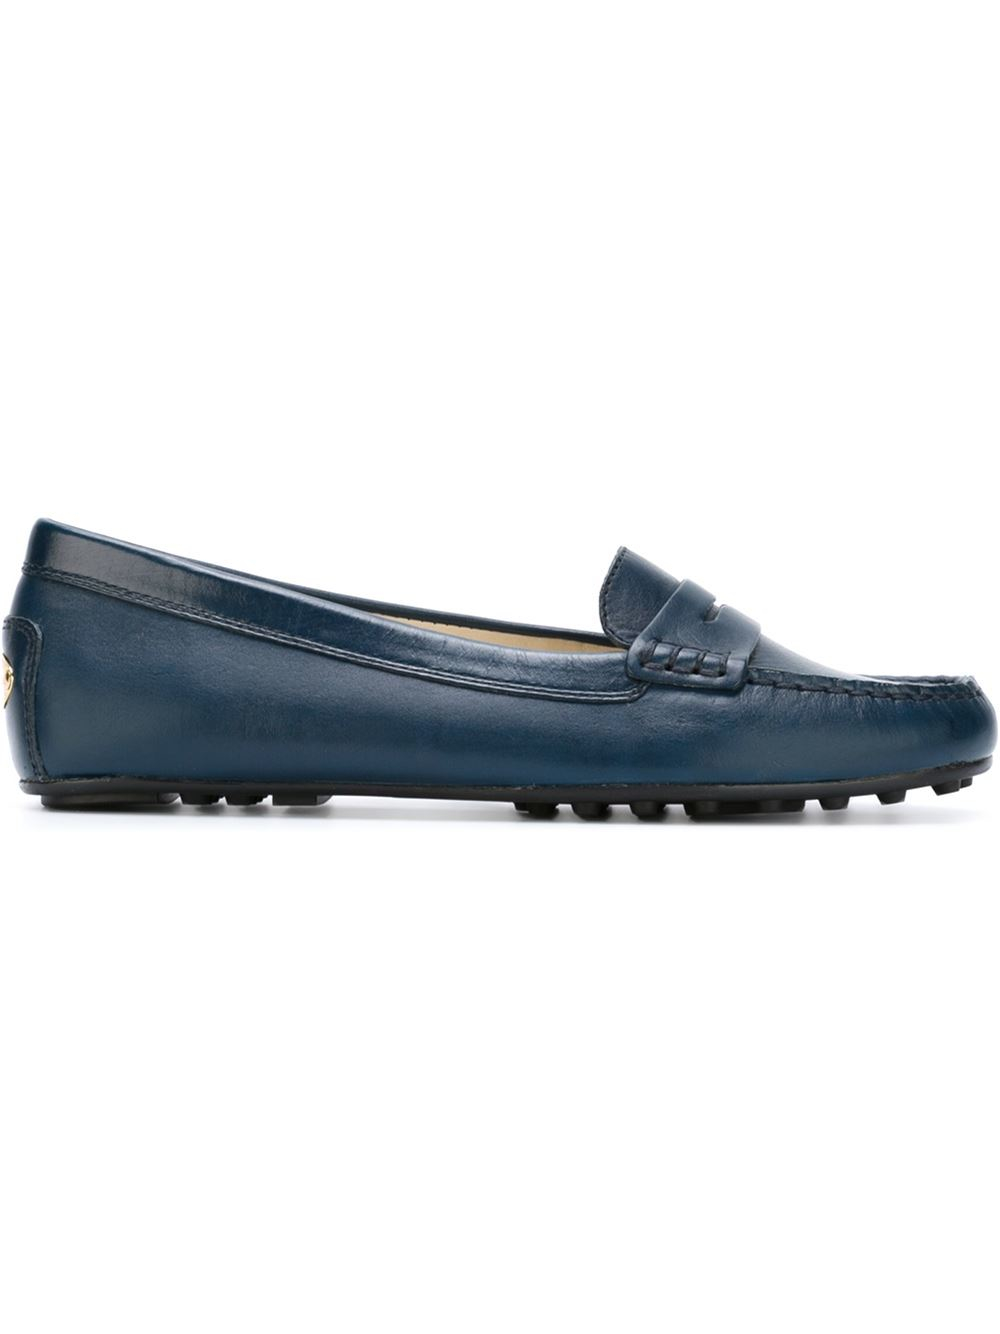 michael kors penny loafers